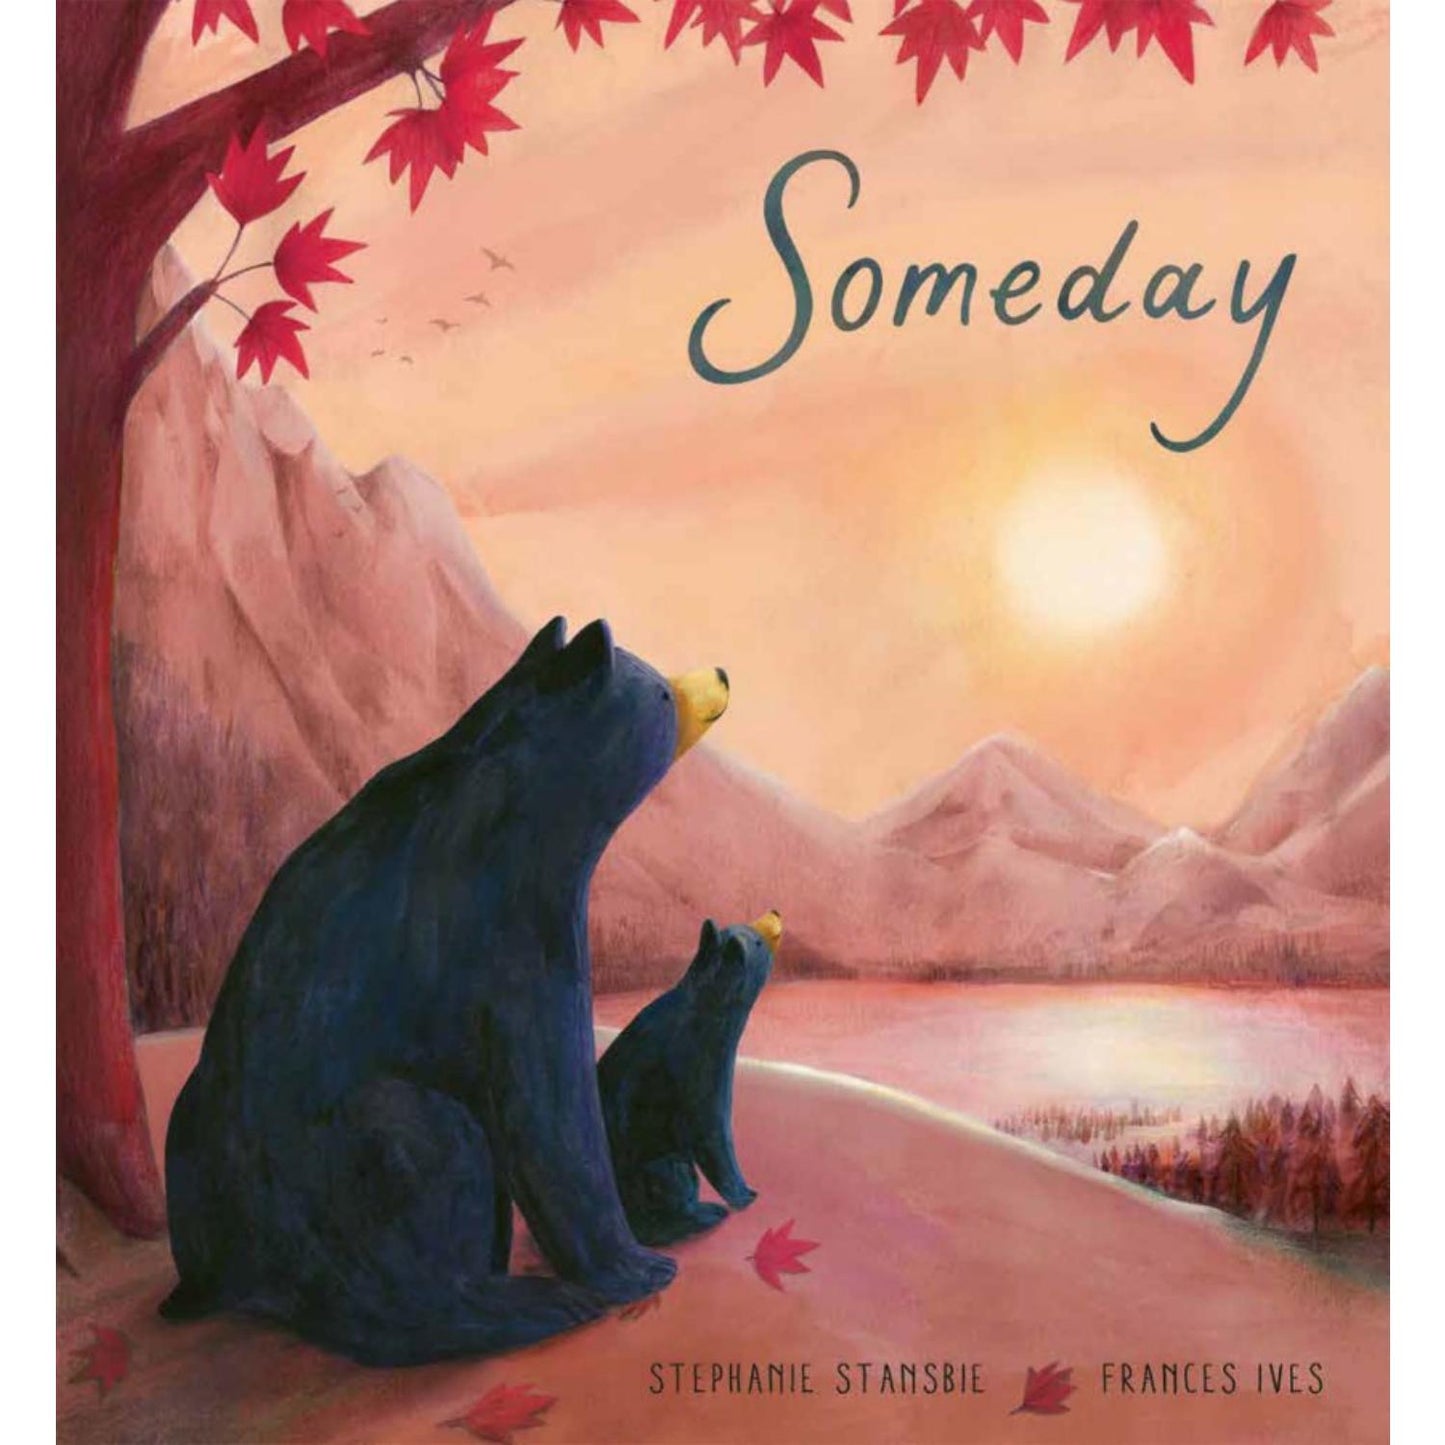 Someday | Hardcover | Children’s Picture Book on Family & Friendship